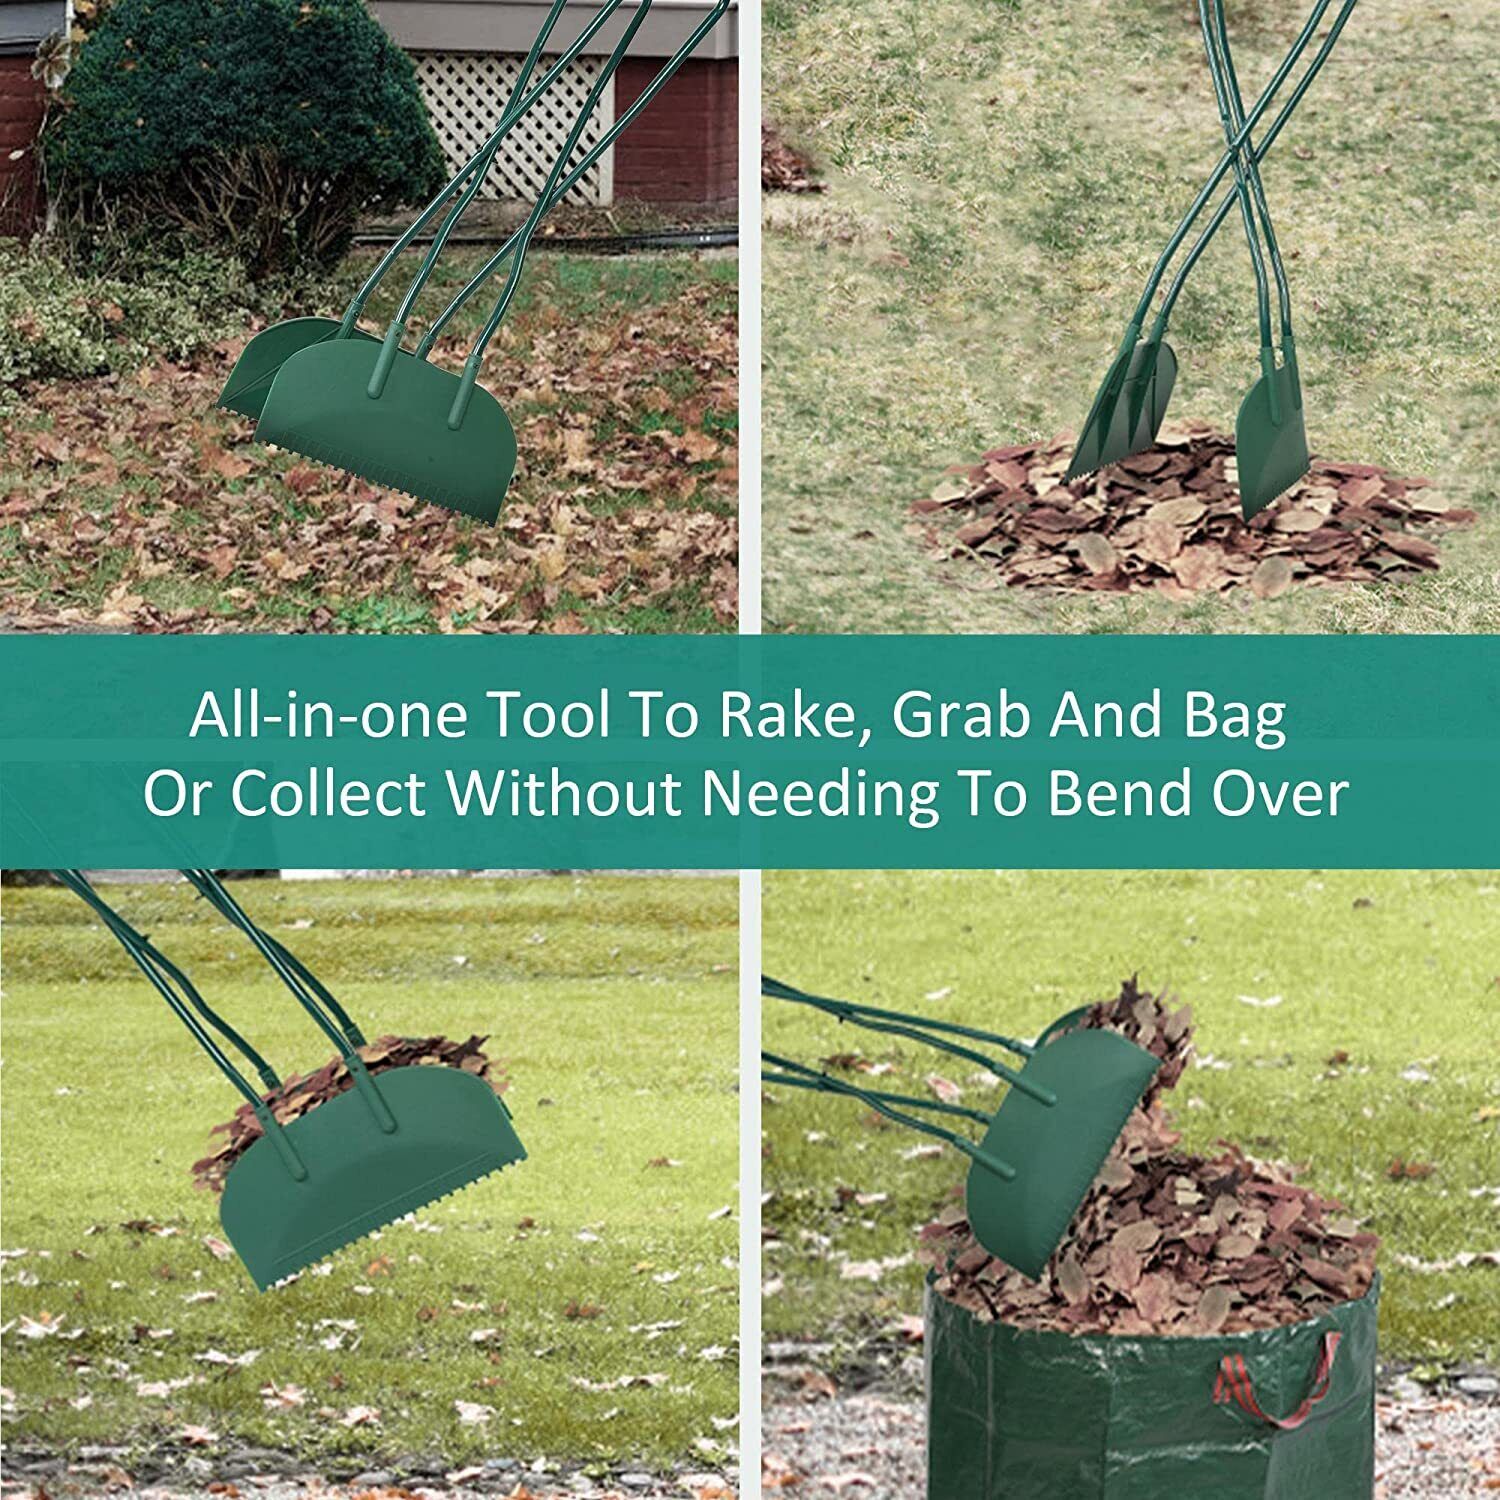 Leaf Scoop Hand Rake Set with Reuseable Garden Bag & 1 Pair Work Gloves for Collecting Leaves, Mulch and Debris